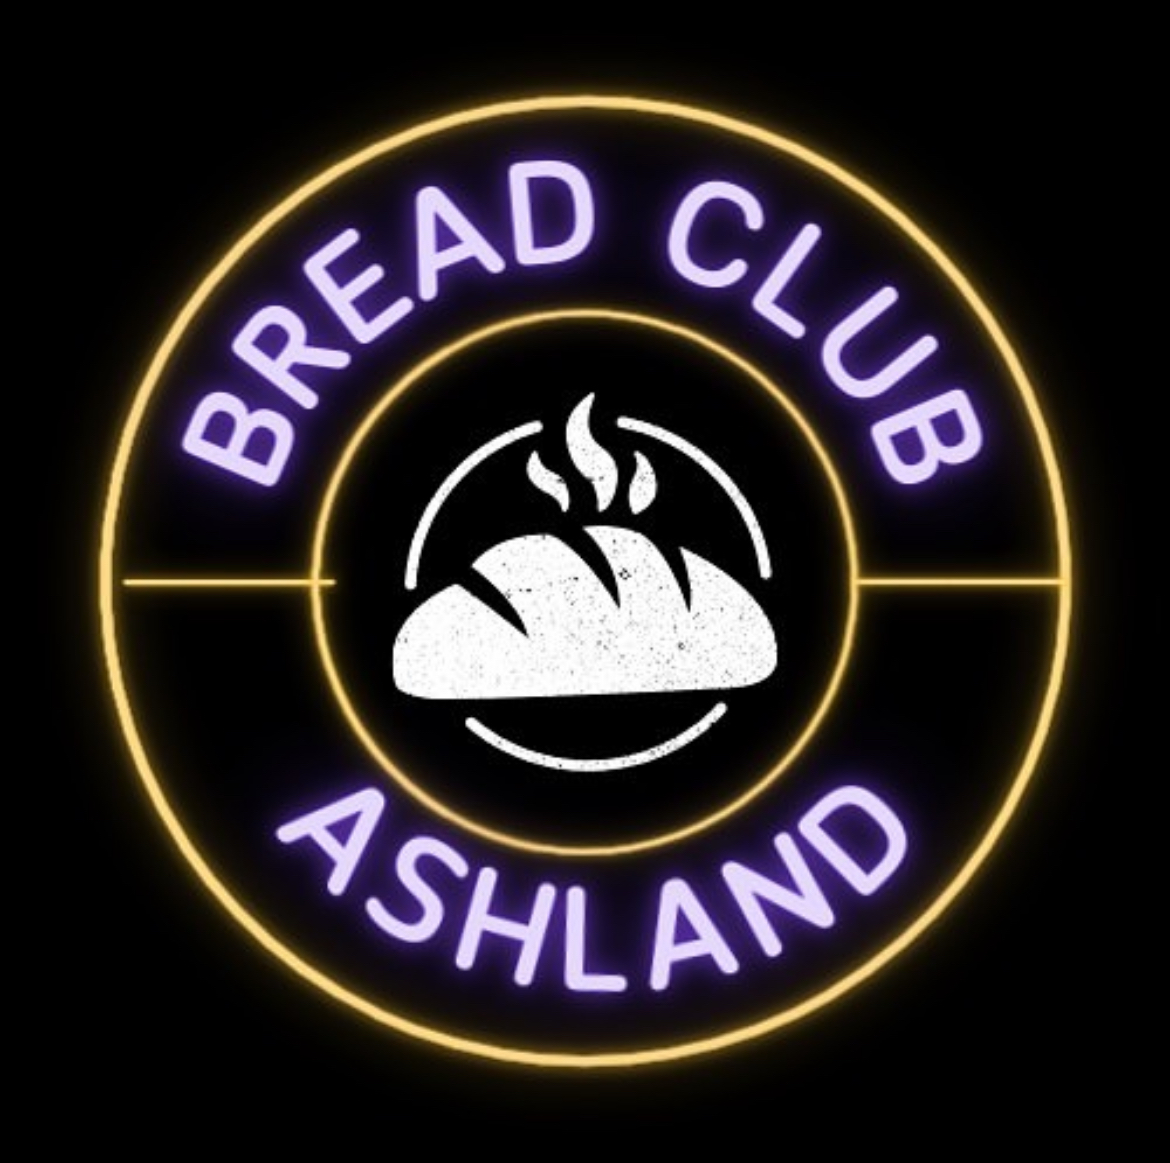 Last but not yeast, AUs Bread Club rises before end of fall semester 